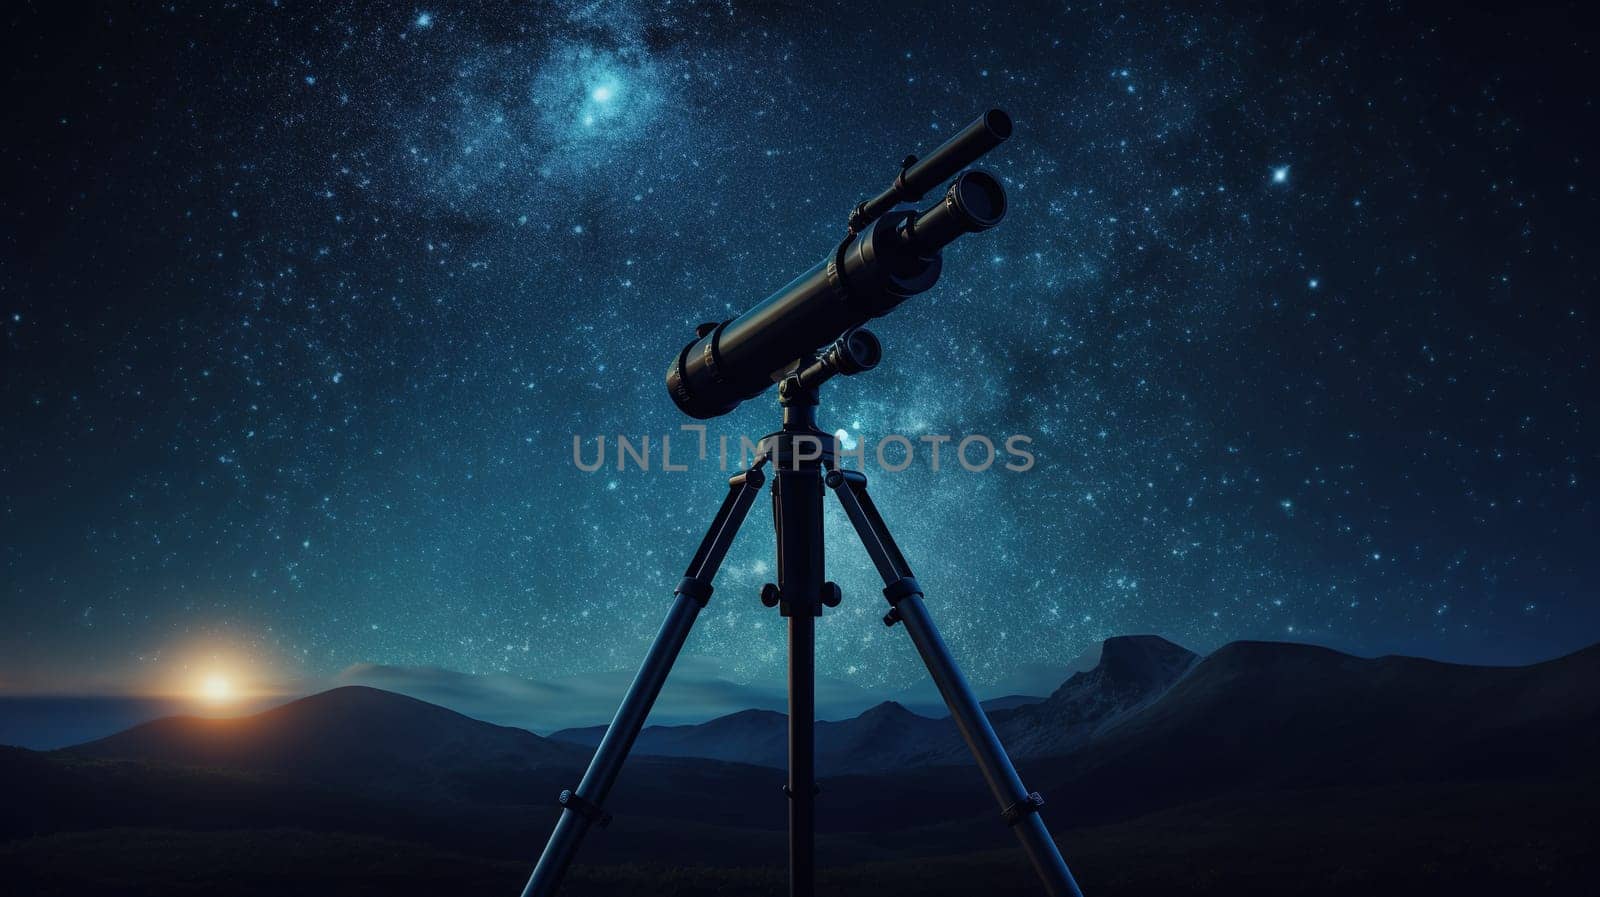 Stargazing a stars and planets through the telescope at night, astrology concept